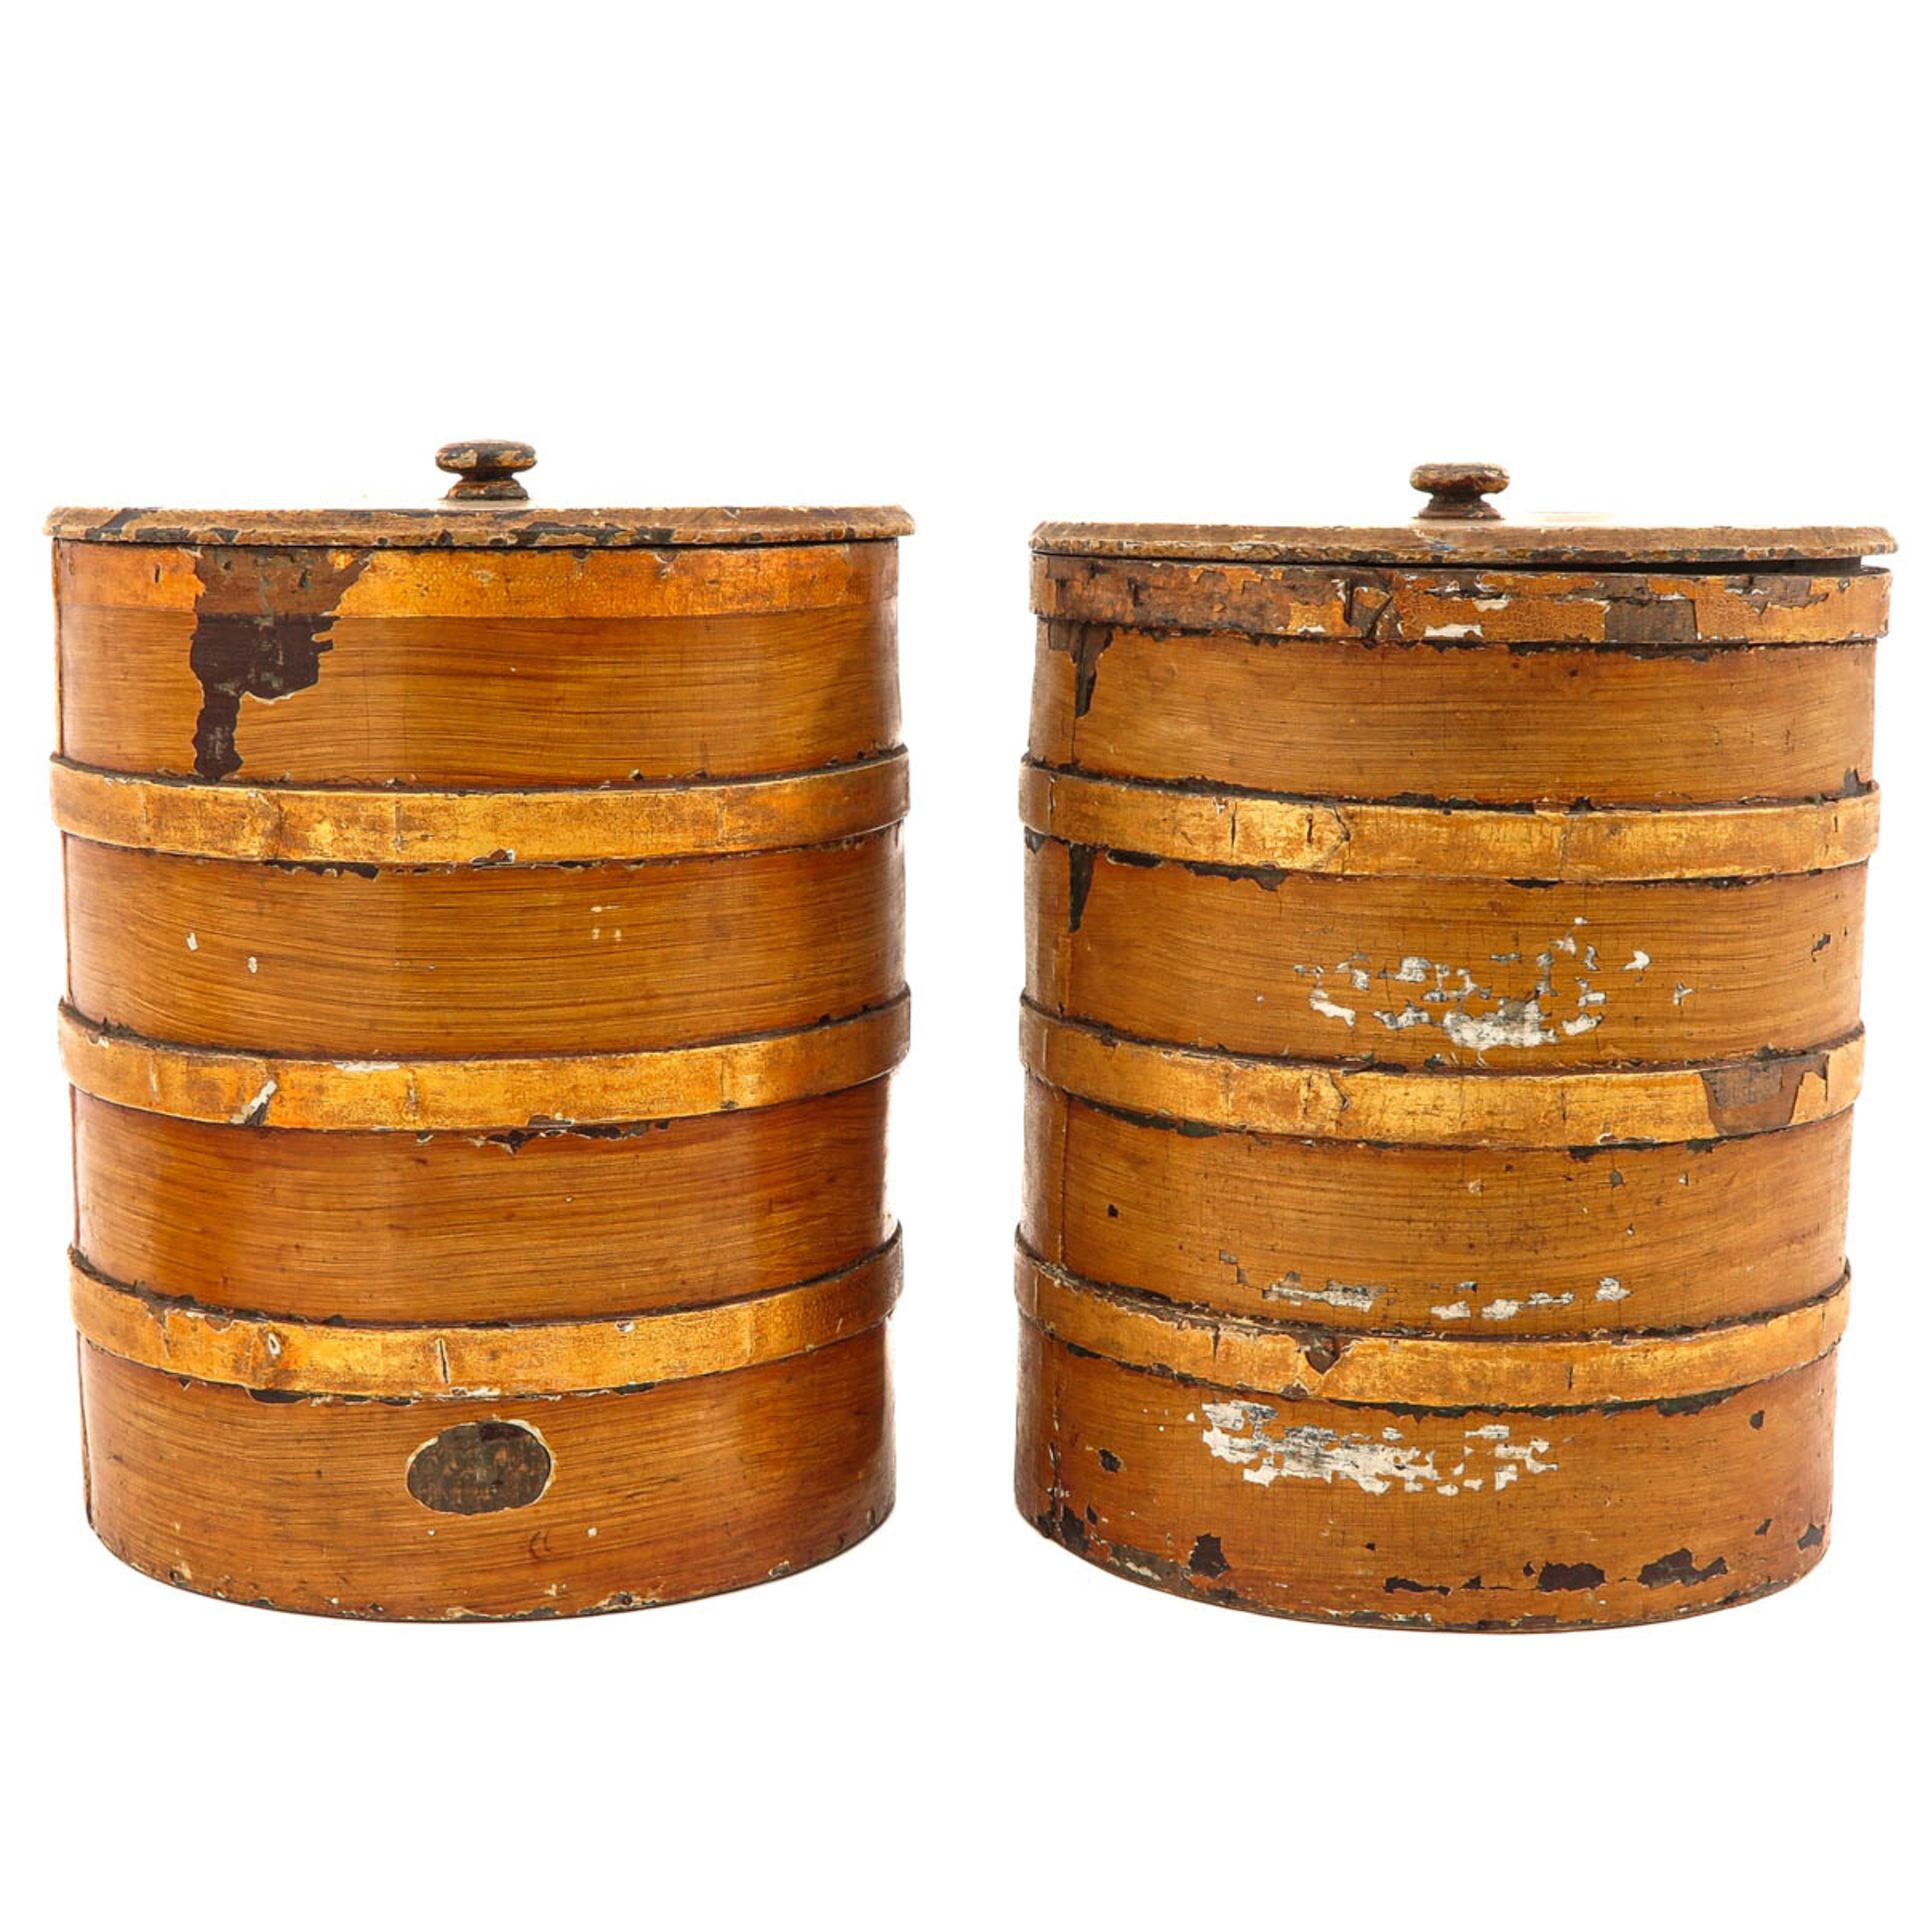 A Pair of Wooden Barrels - Image 3 of 9